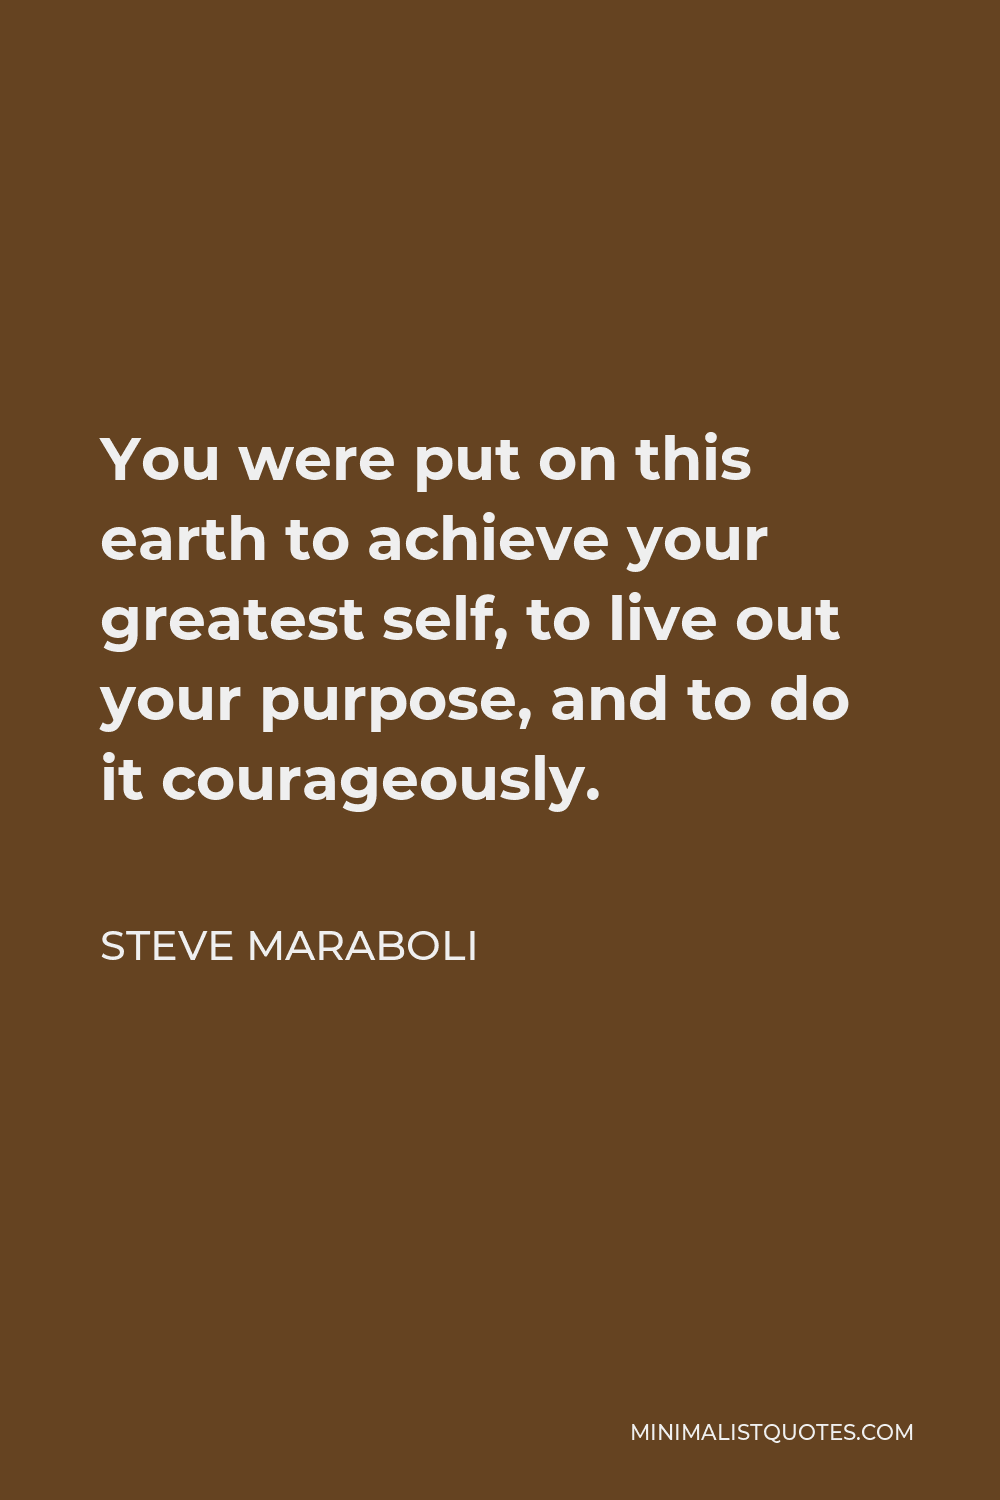 Steve Maraboli Quote - You were put on this earth to achieve your greatest self, to live out your purpose, and to do it courageously.